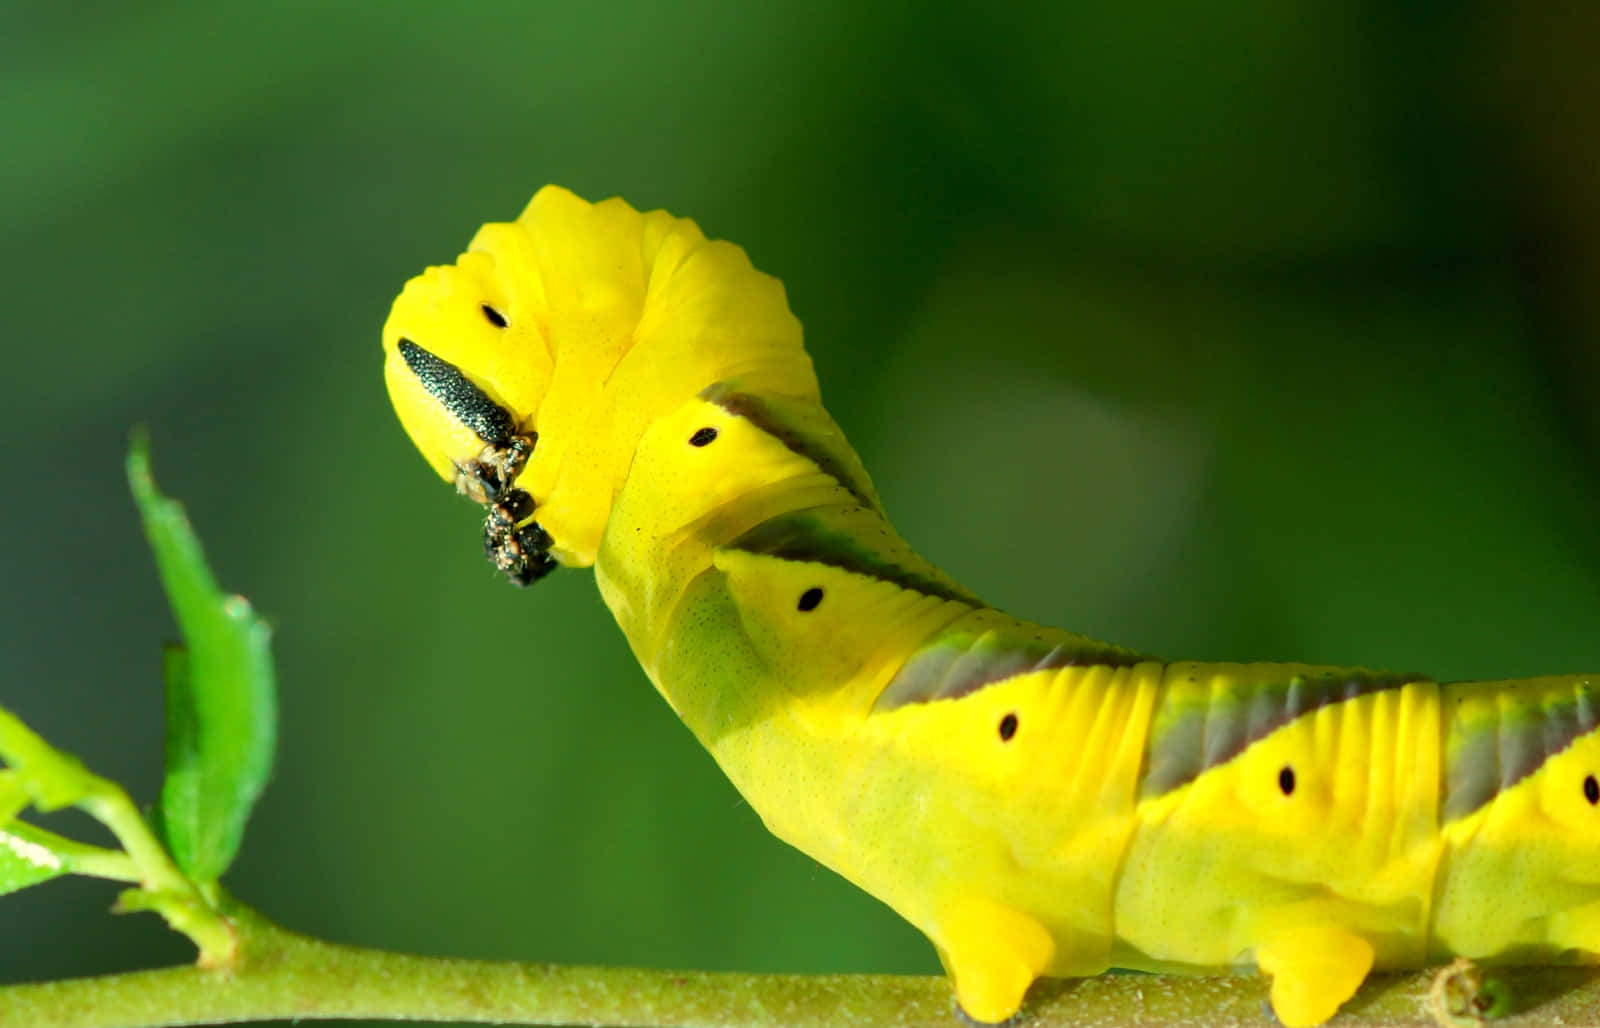 "Observe the beauty of this Caterpillar Insect"